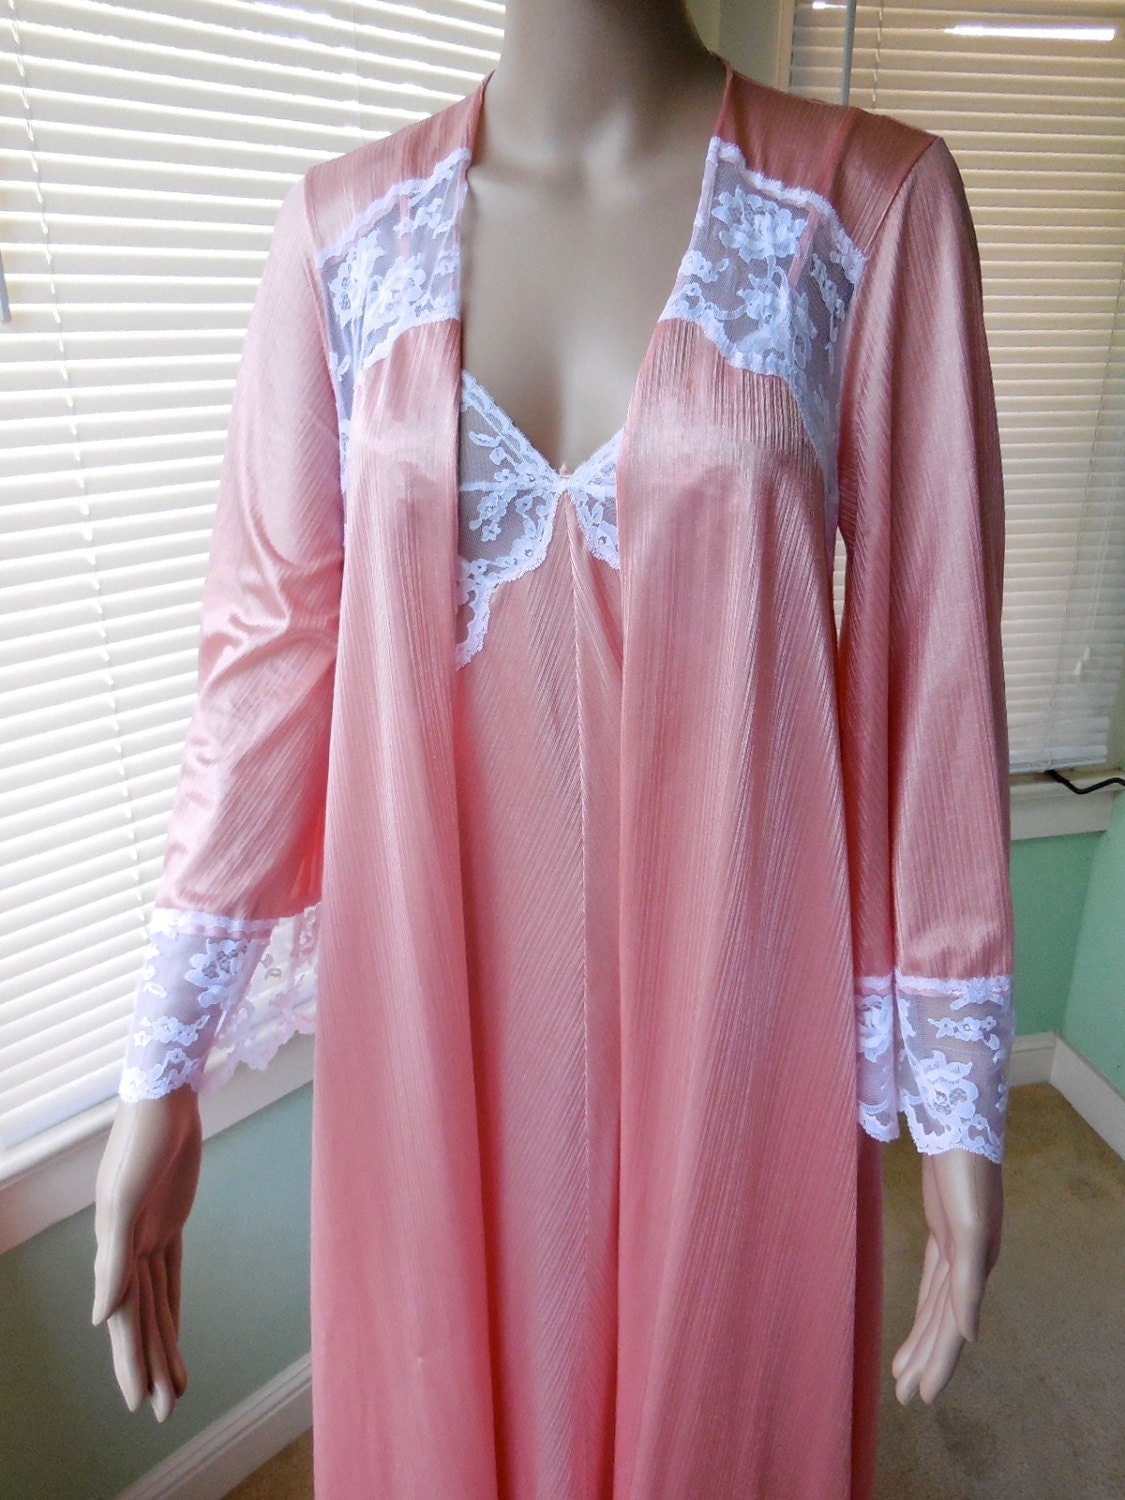 View Miss Elaine Nightgown And Robe Set Pics - Noveletras